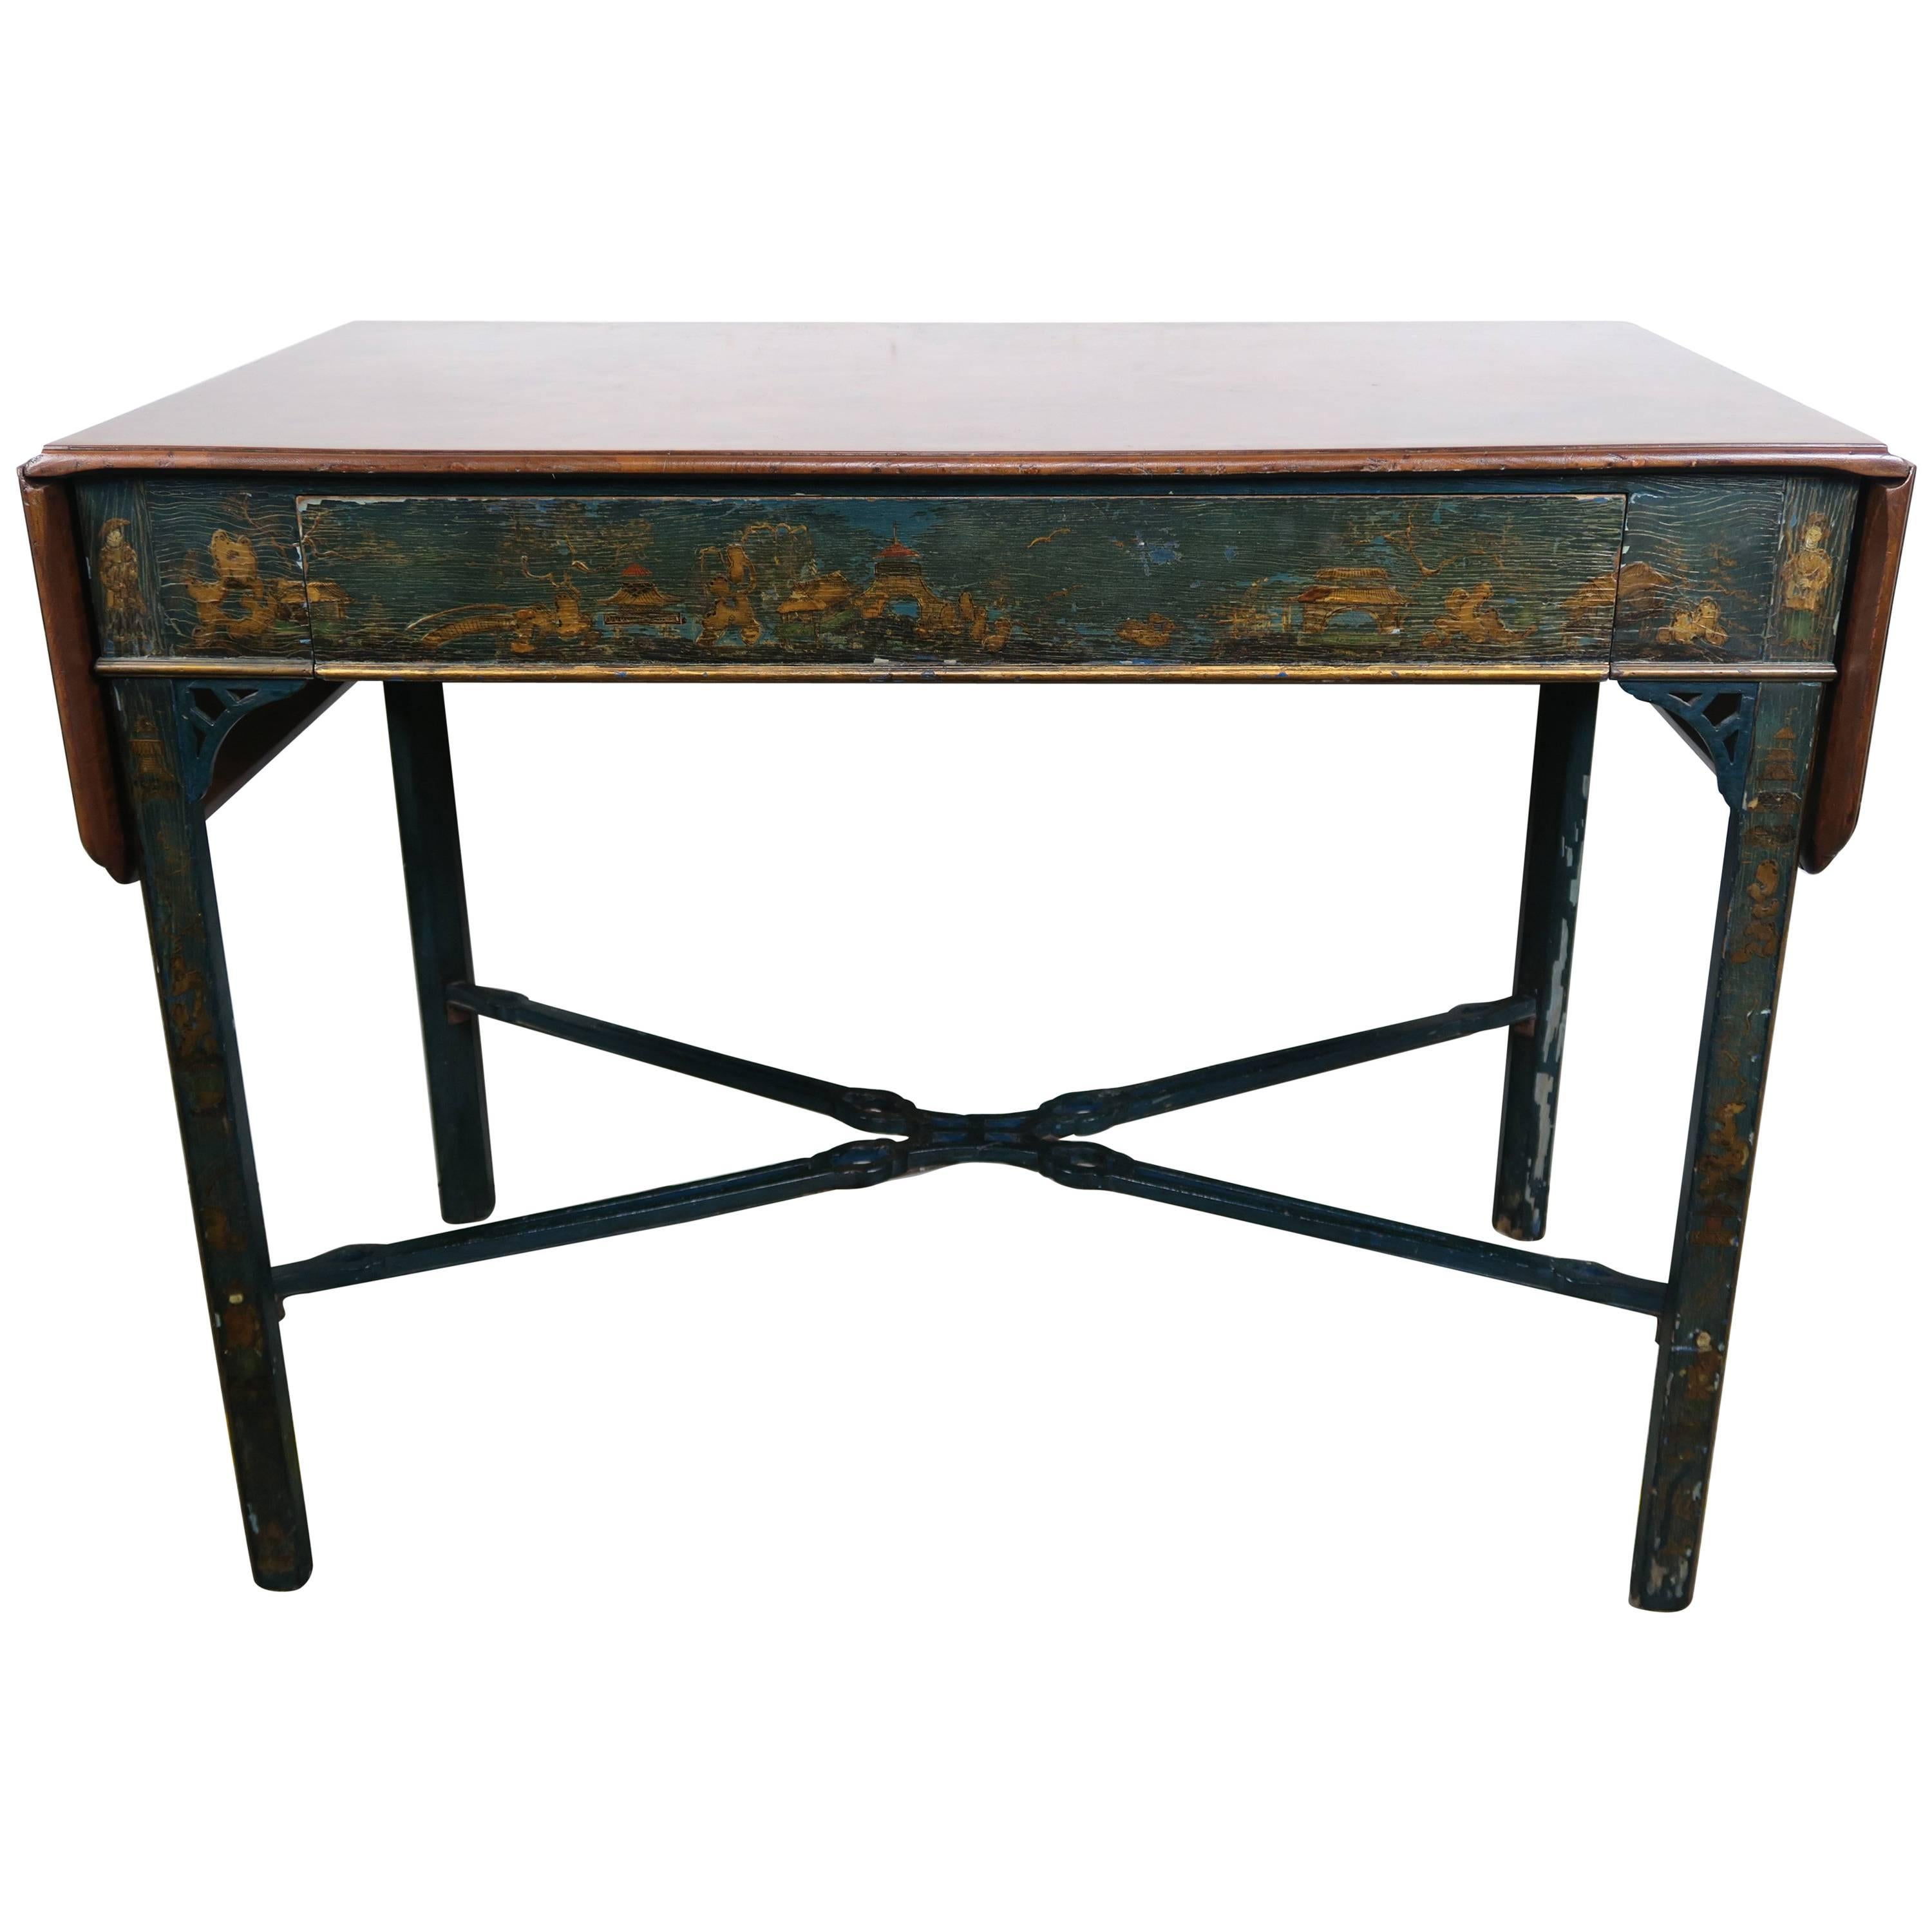 English Painted Chinoiserie Chippendale Style Table